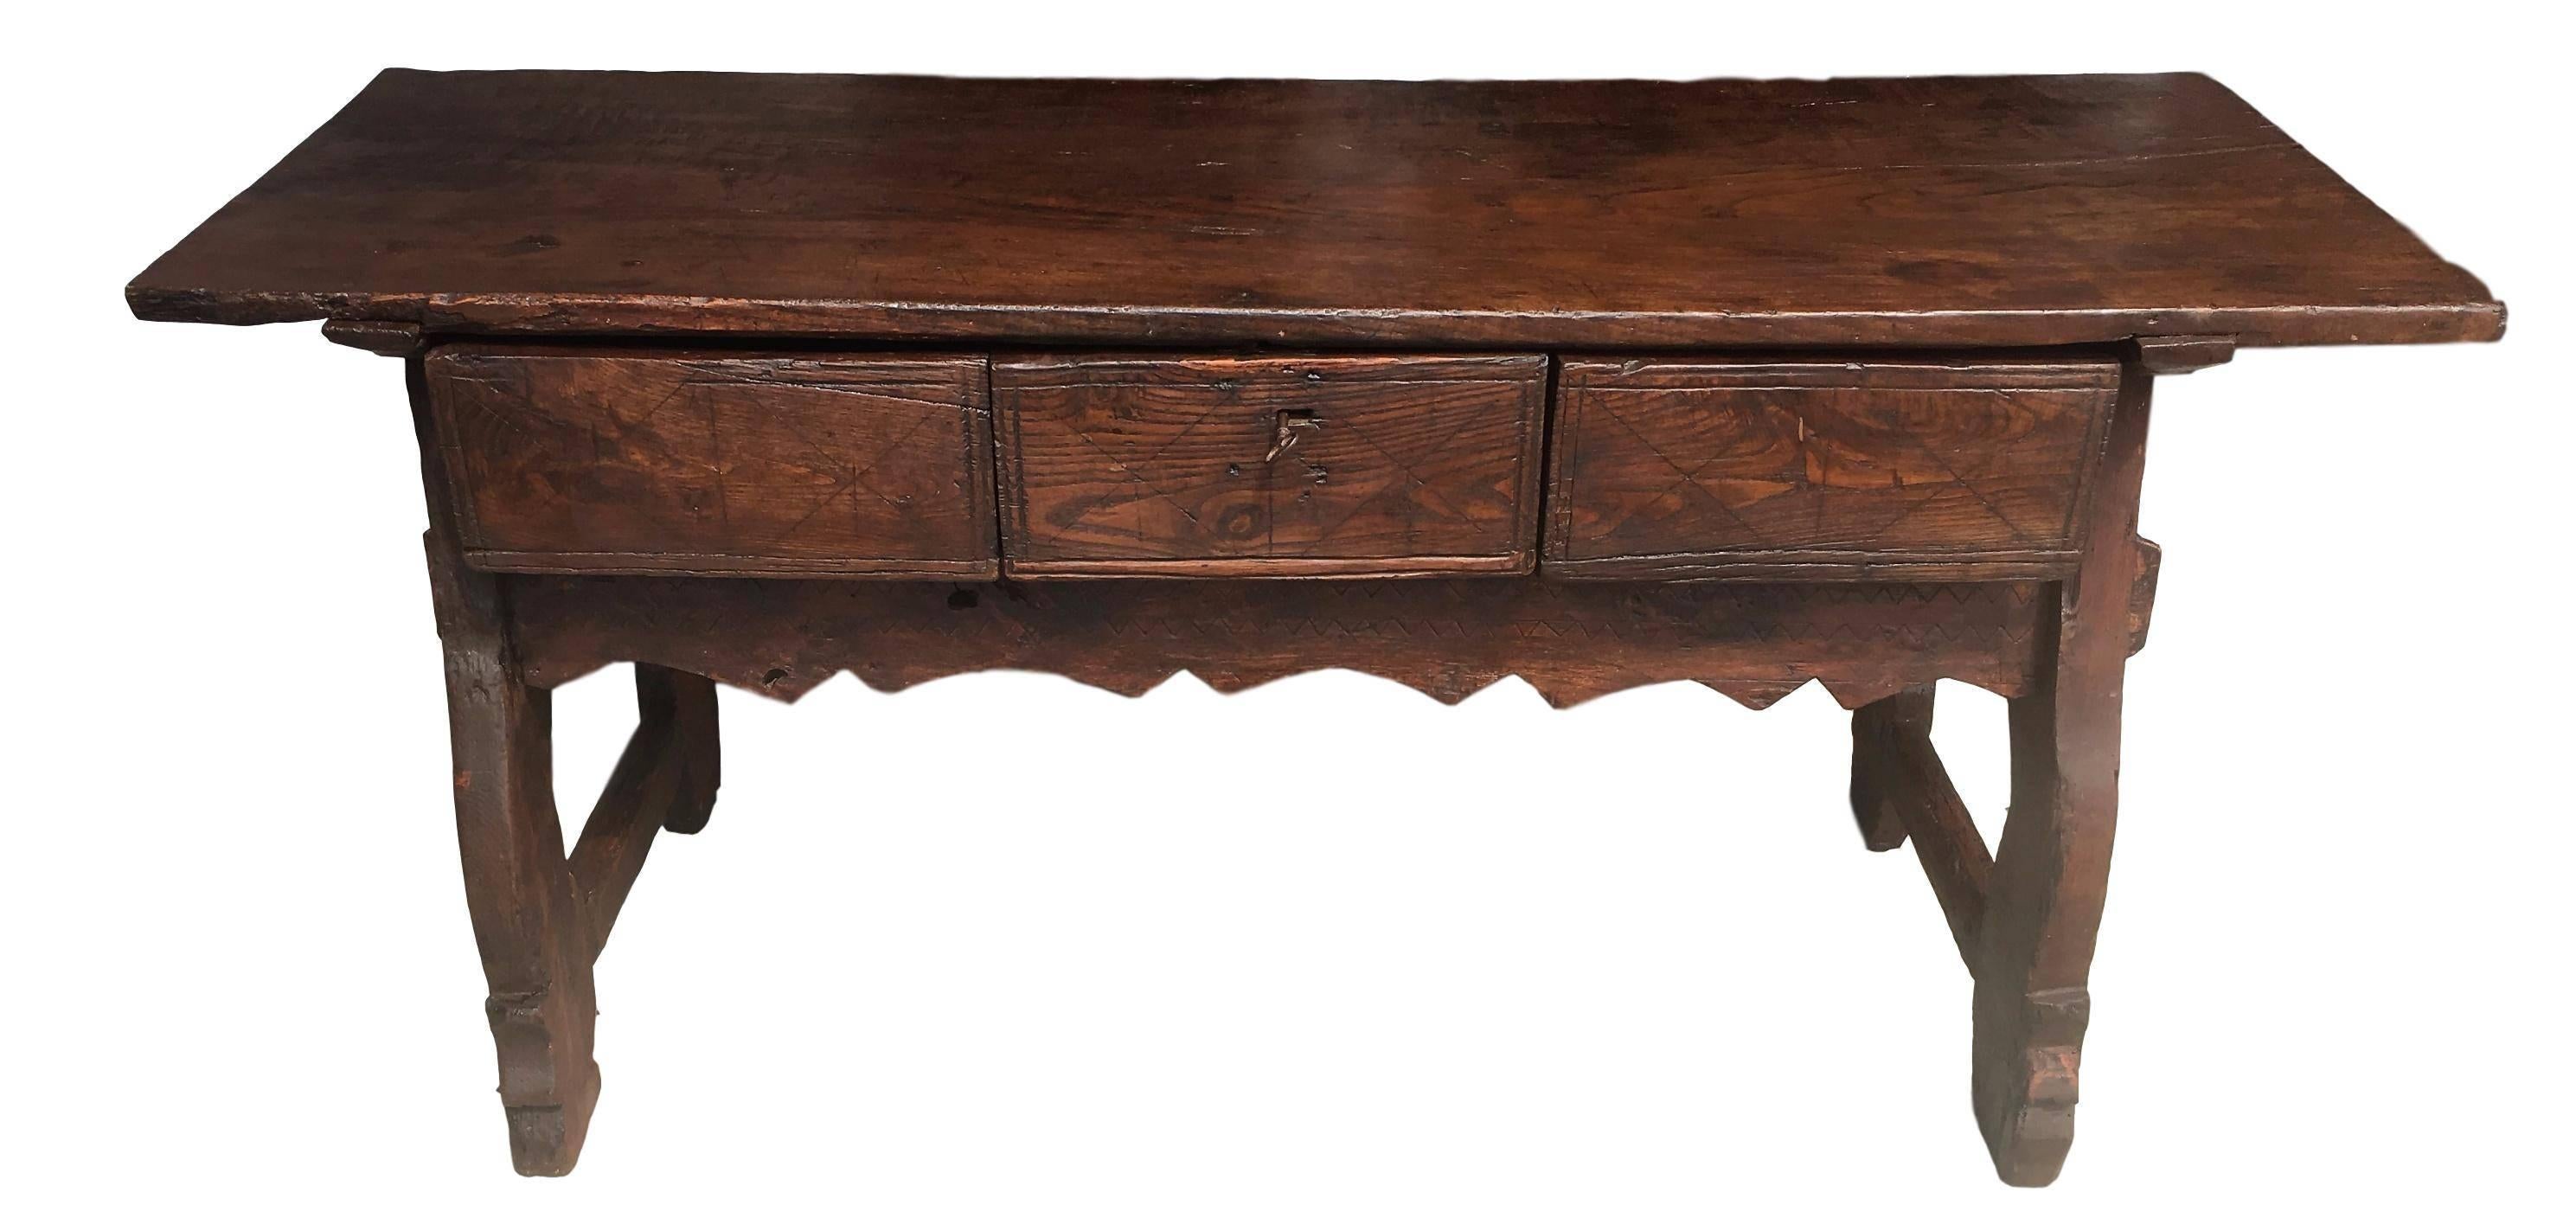 18th Spanish refectory table with three drawers.
This antique table has a special charm, the wood, the color, the measurements, it´s beautiful but heavy, it´s different and special. I love it!

